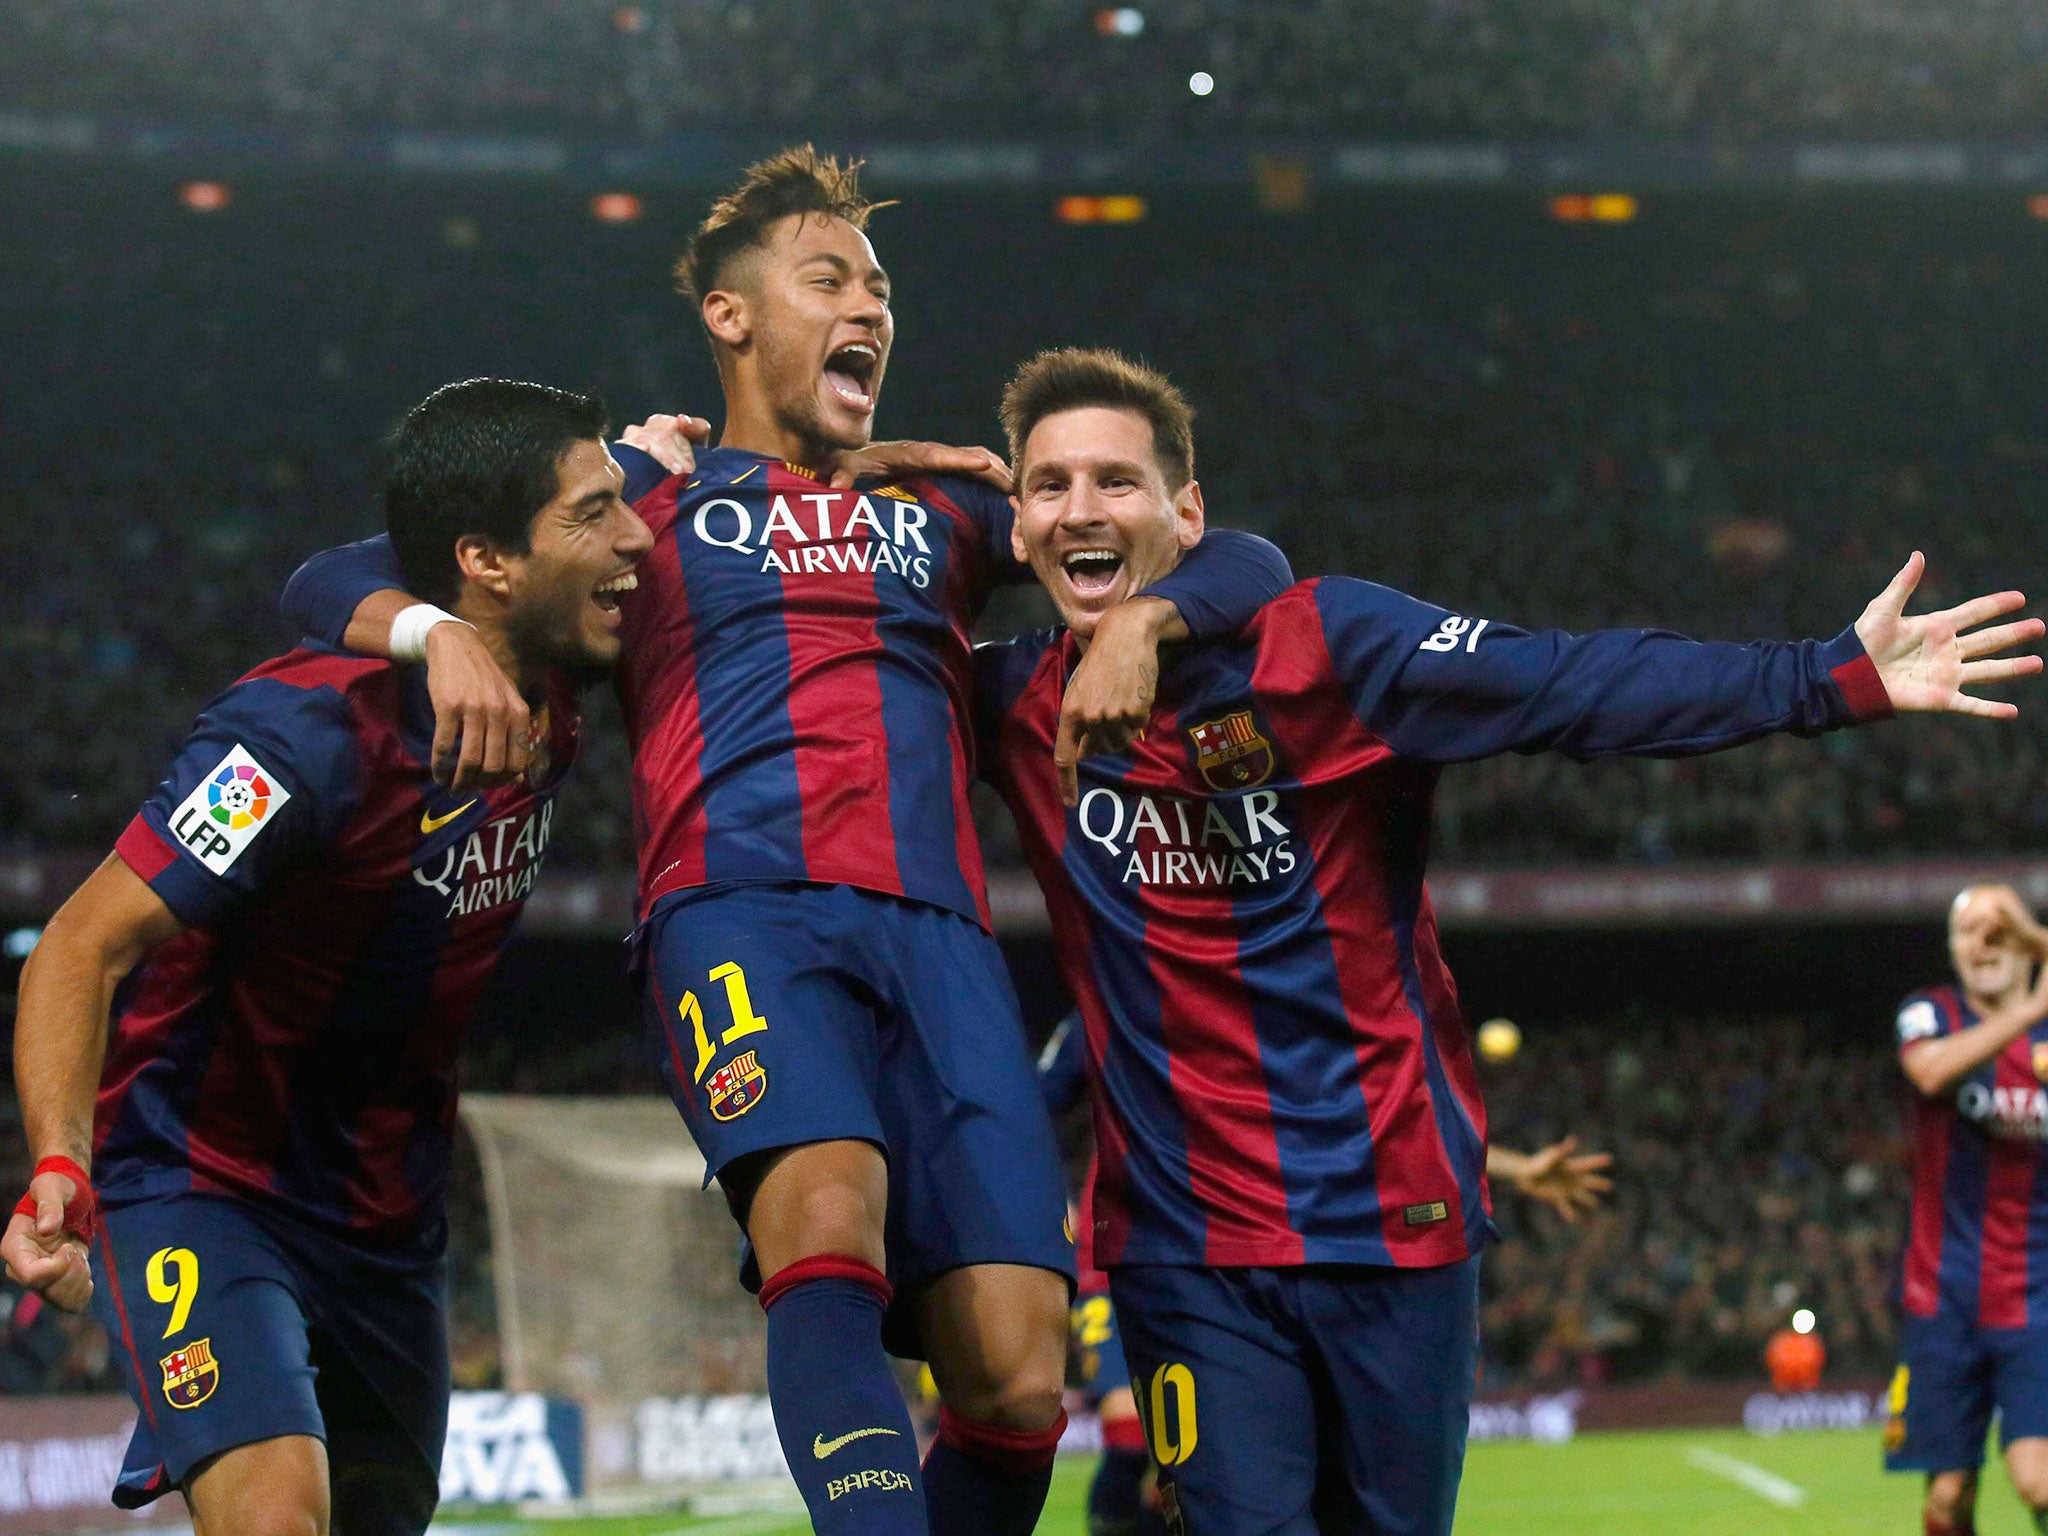 (L-R) Barcelona's Luis Suarez, Neymar and Lionel Messi celebrate a goal against Atletico Madrid during their Spanish First Division soccer match at Camp Nou stadium in Barcelona